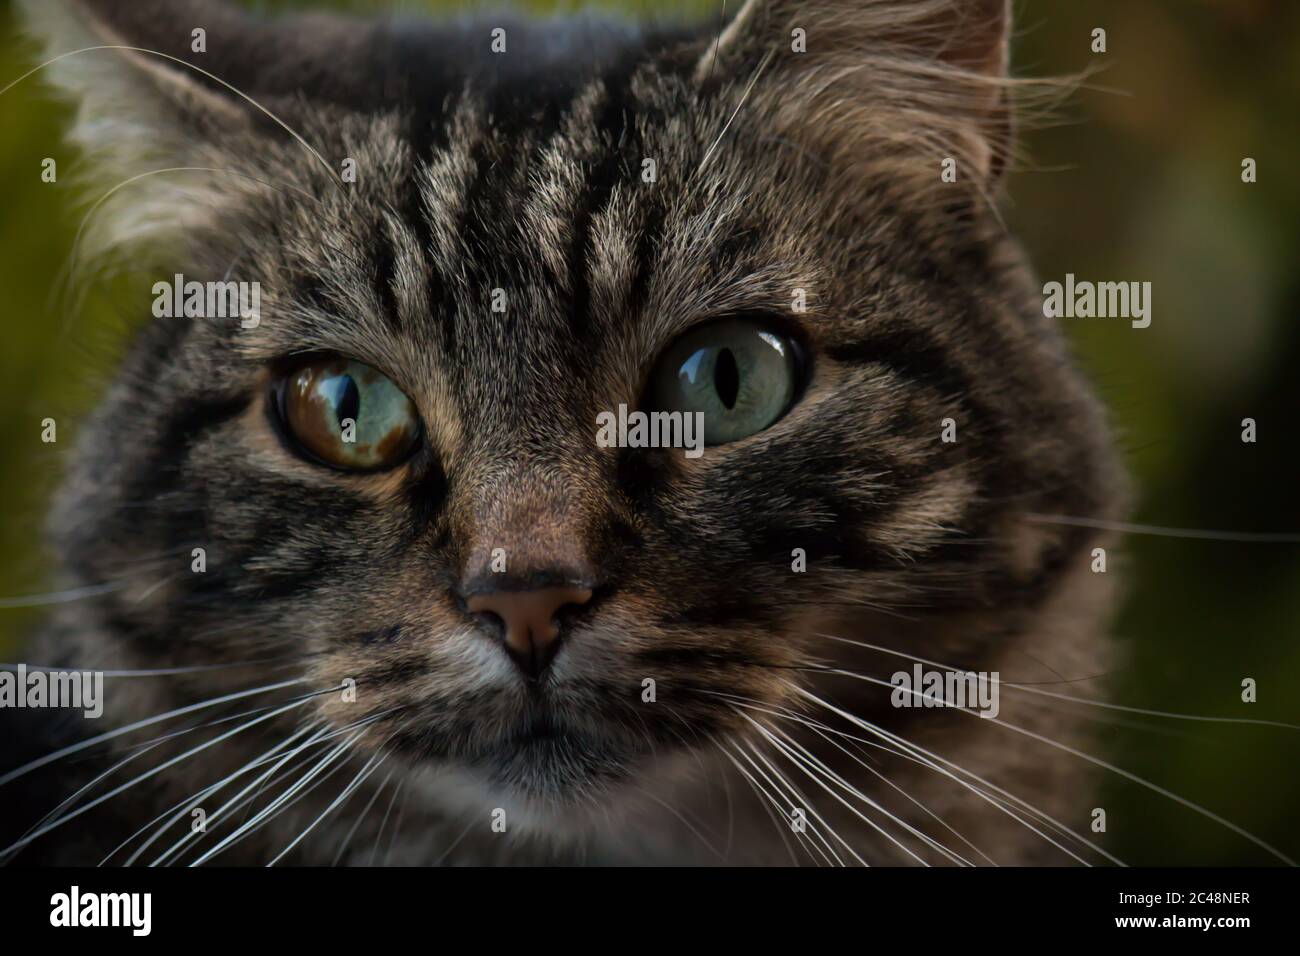 Portrait of a tabby cat with heterochromia in his right eye Stock Photo